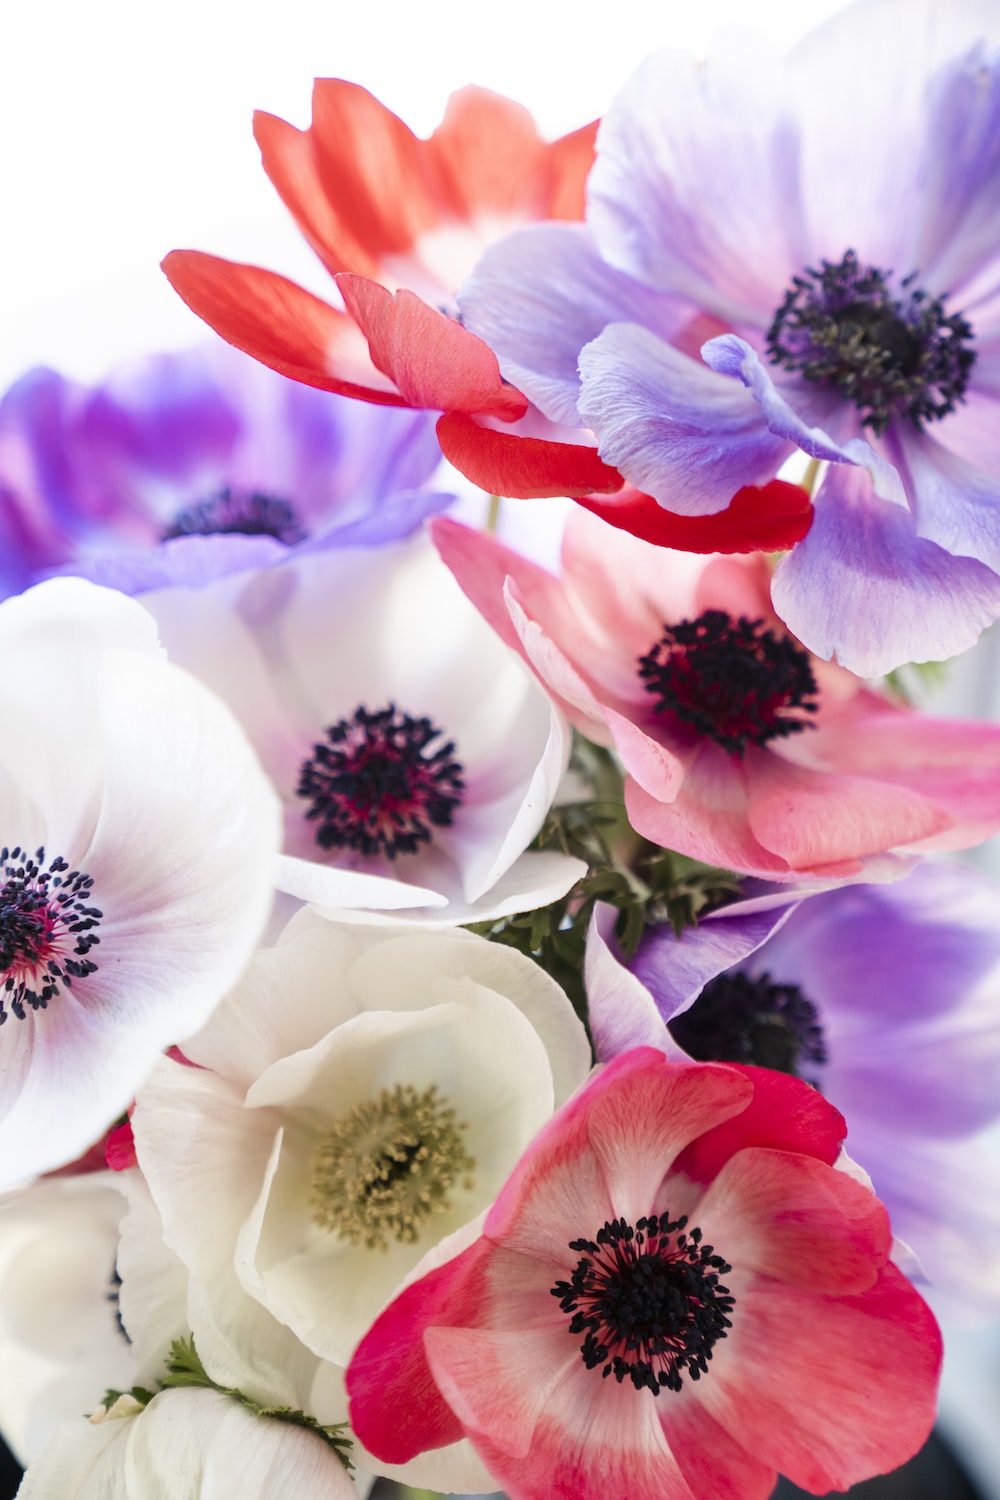 Anemone flower pictures download free images on